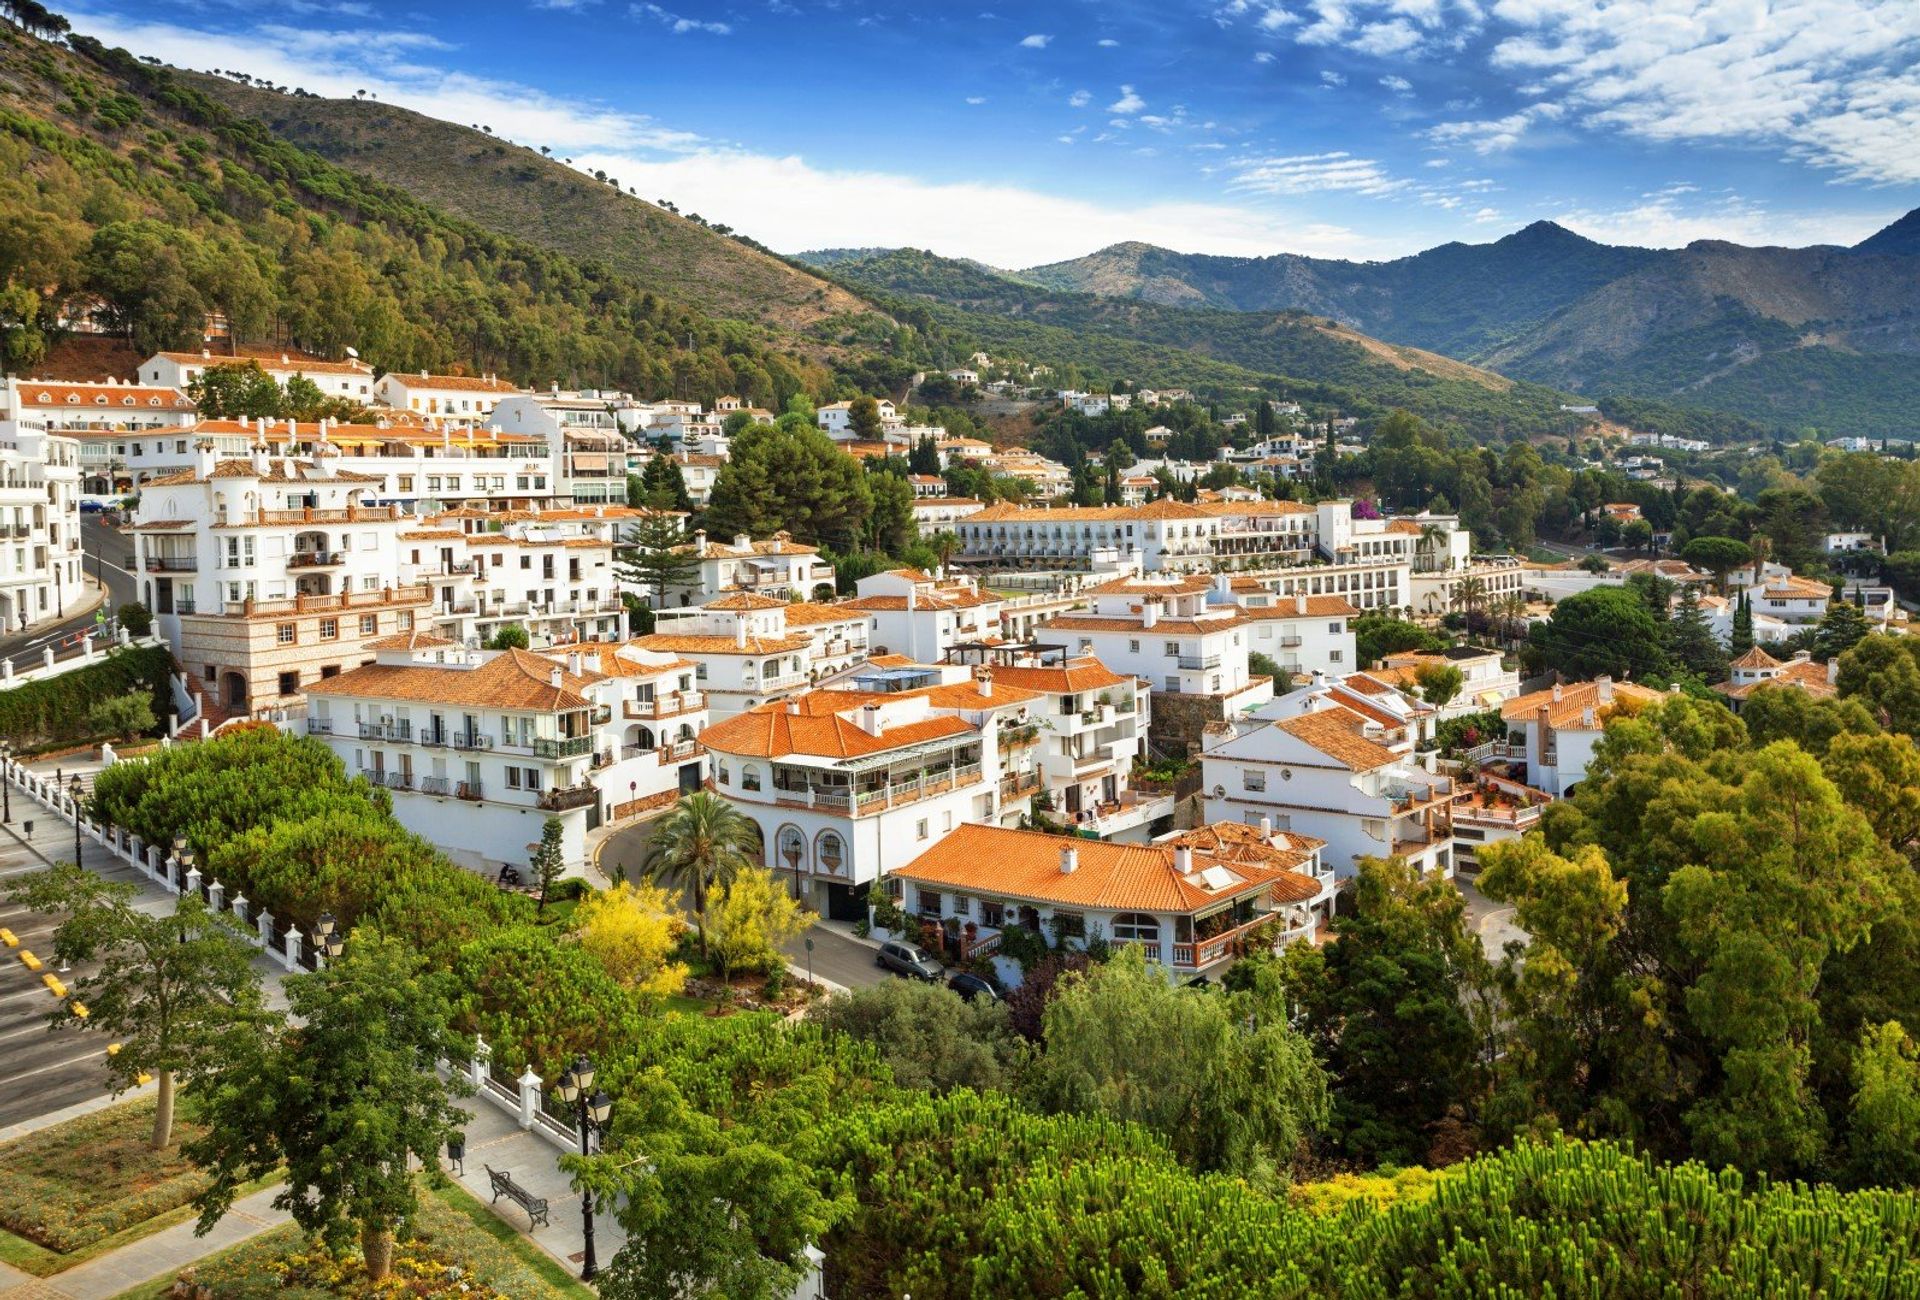 Revel in the charms of a traditional Andalucian village with a stroll around hilltop Mijas